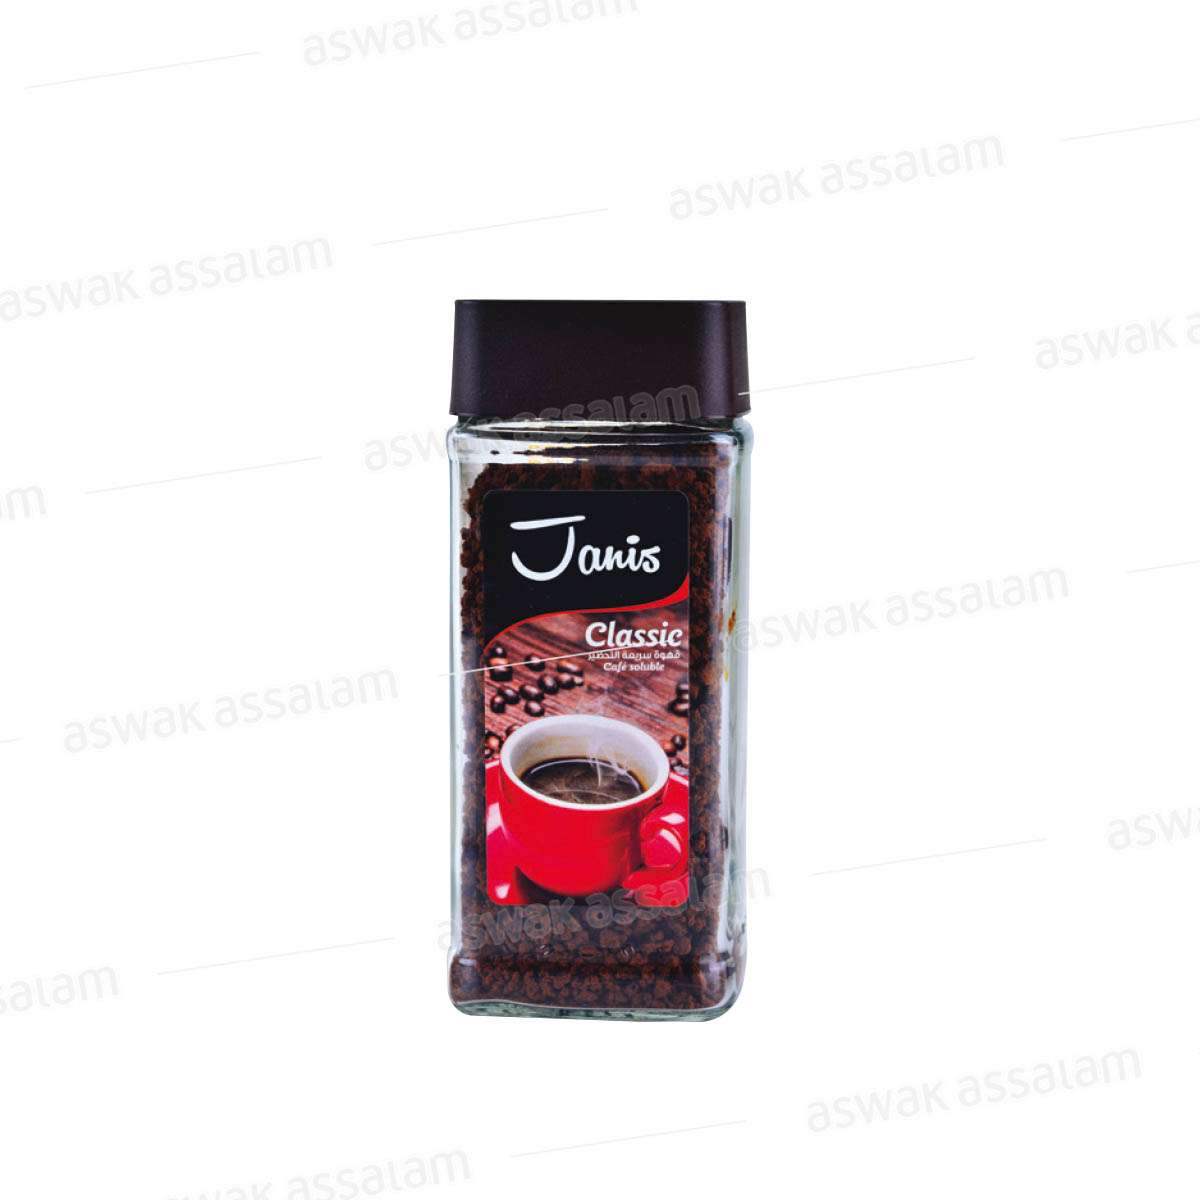 CAFE SOLUBLE CLASSIC 45G JANIS